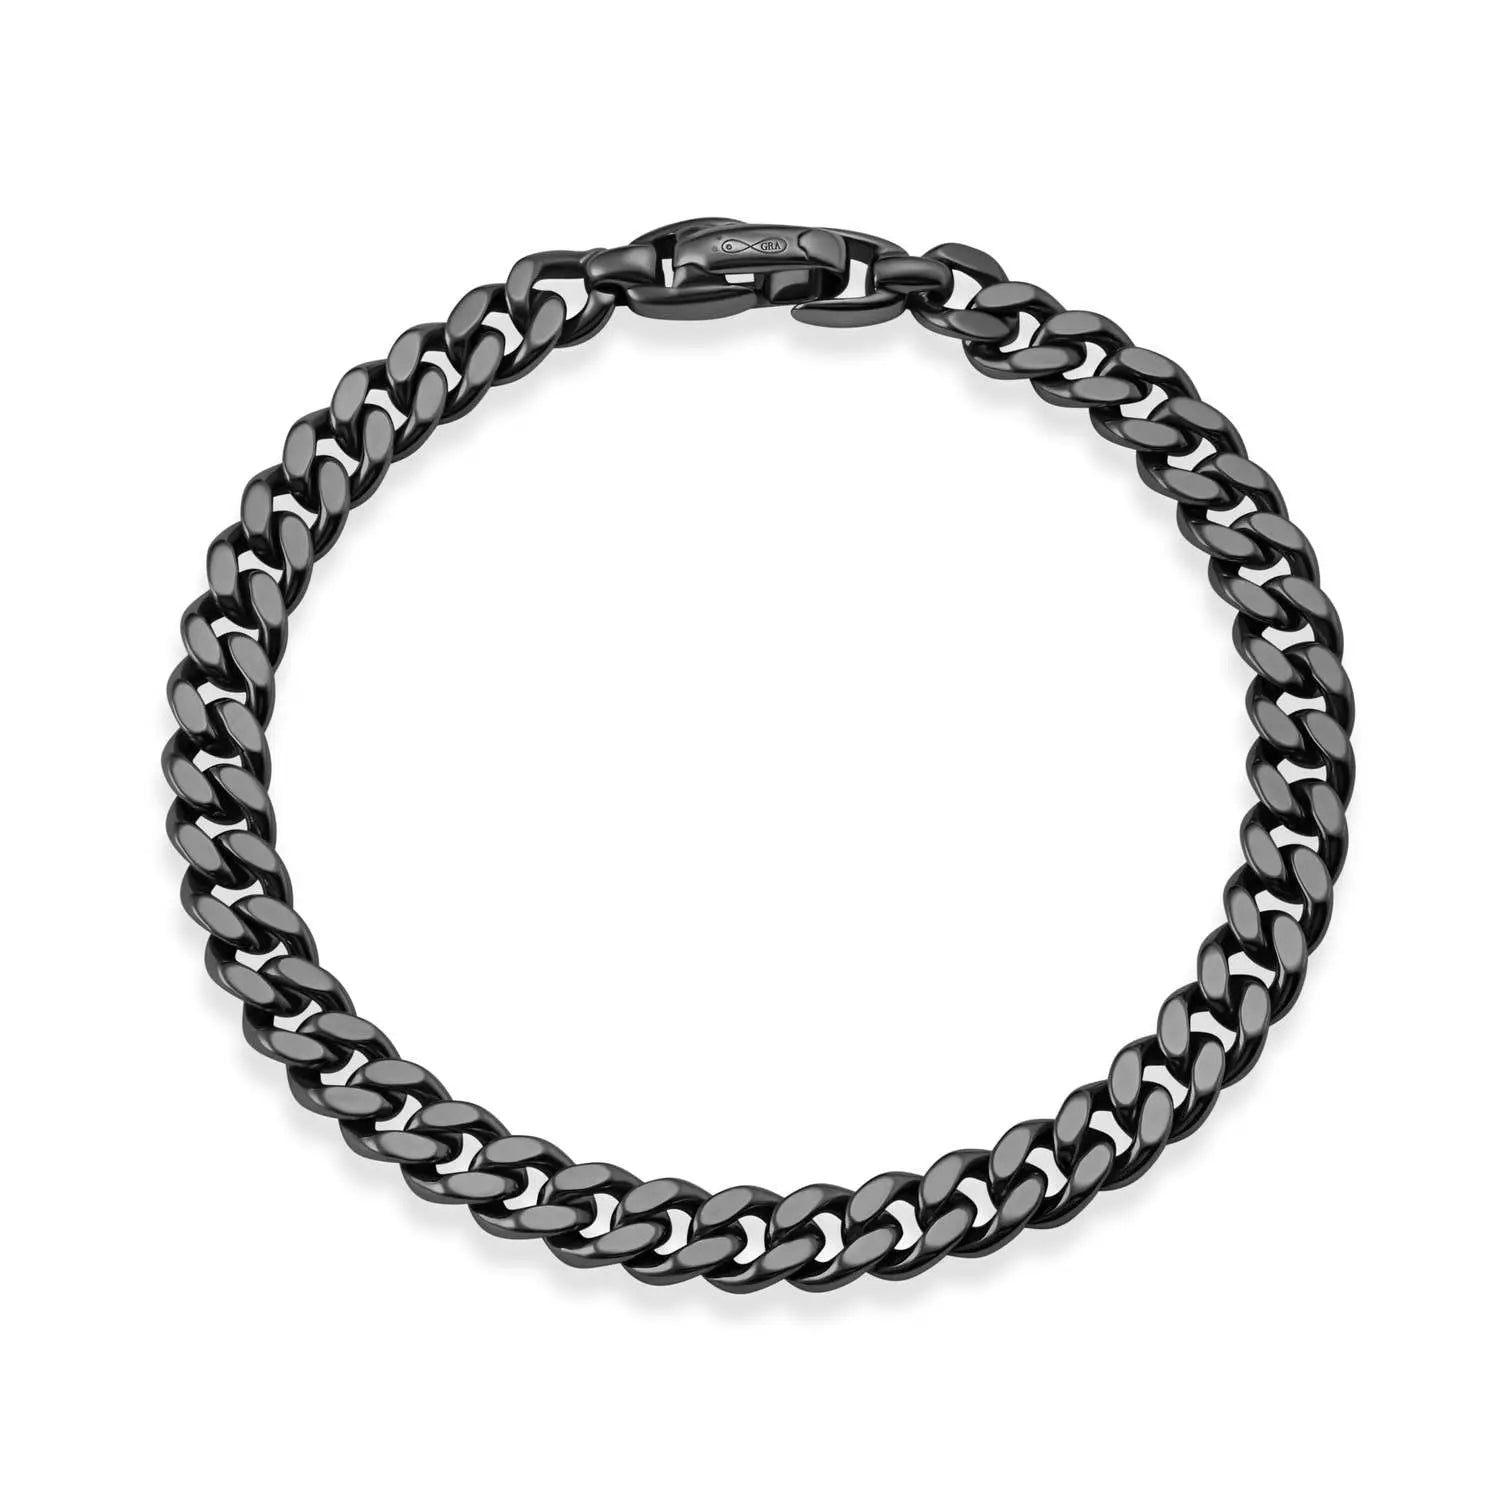 Details:  6MM Cuban Chain Metal:  Black Ruthenium Sterling Silver, Yellow Vermeil Sterling Silver or White Rhodium Sterling Silver